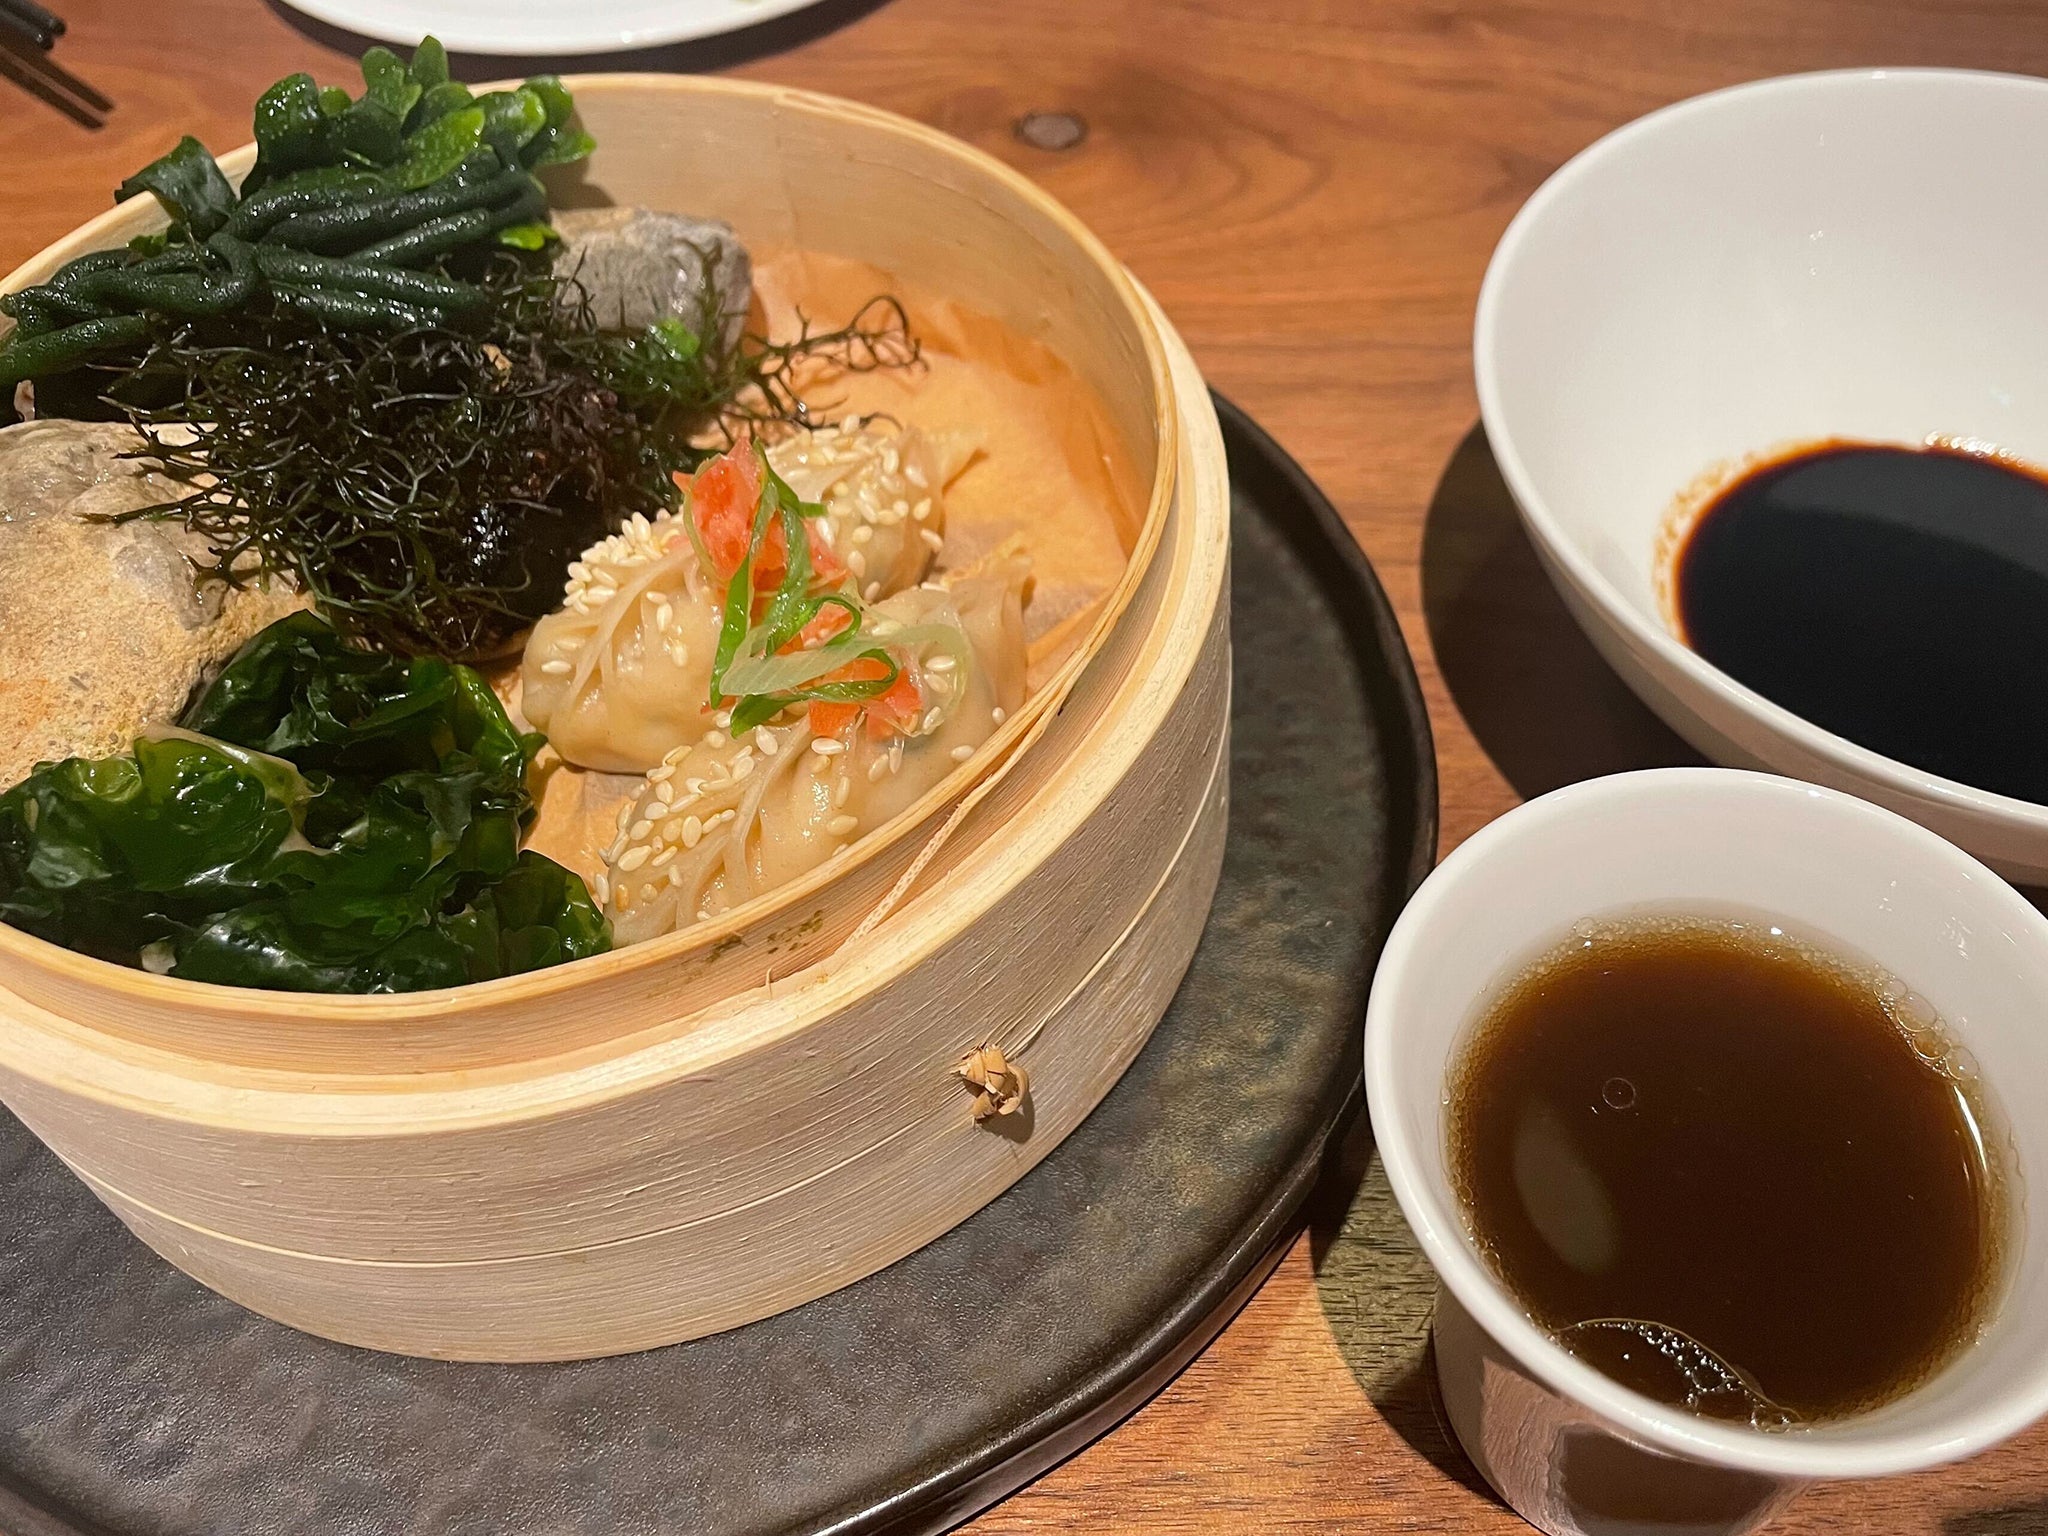 Crab dumplings are served with steamed seaweed for the aroma